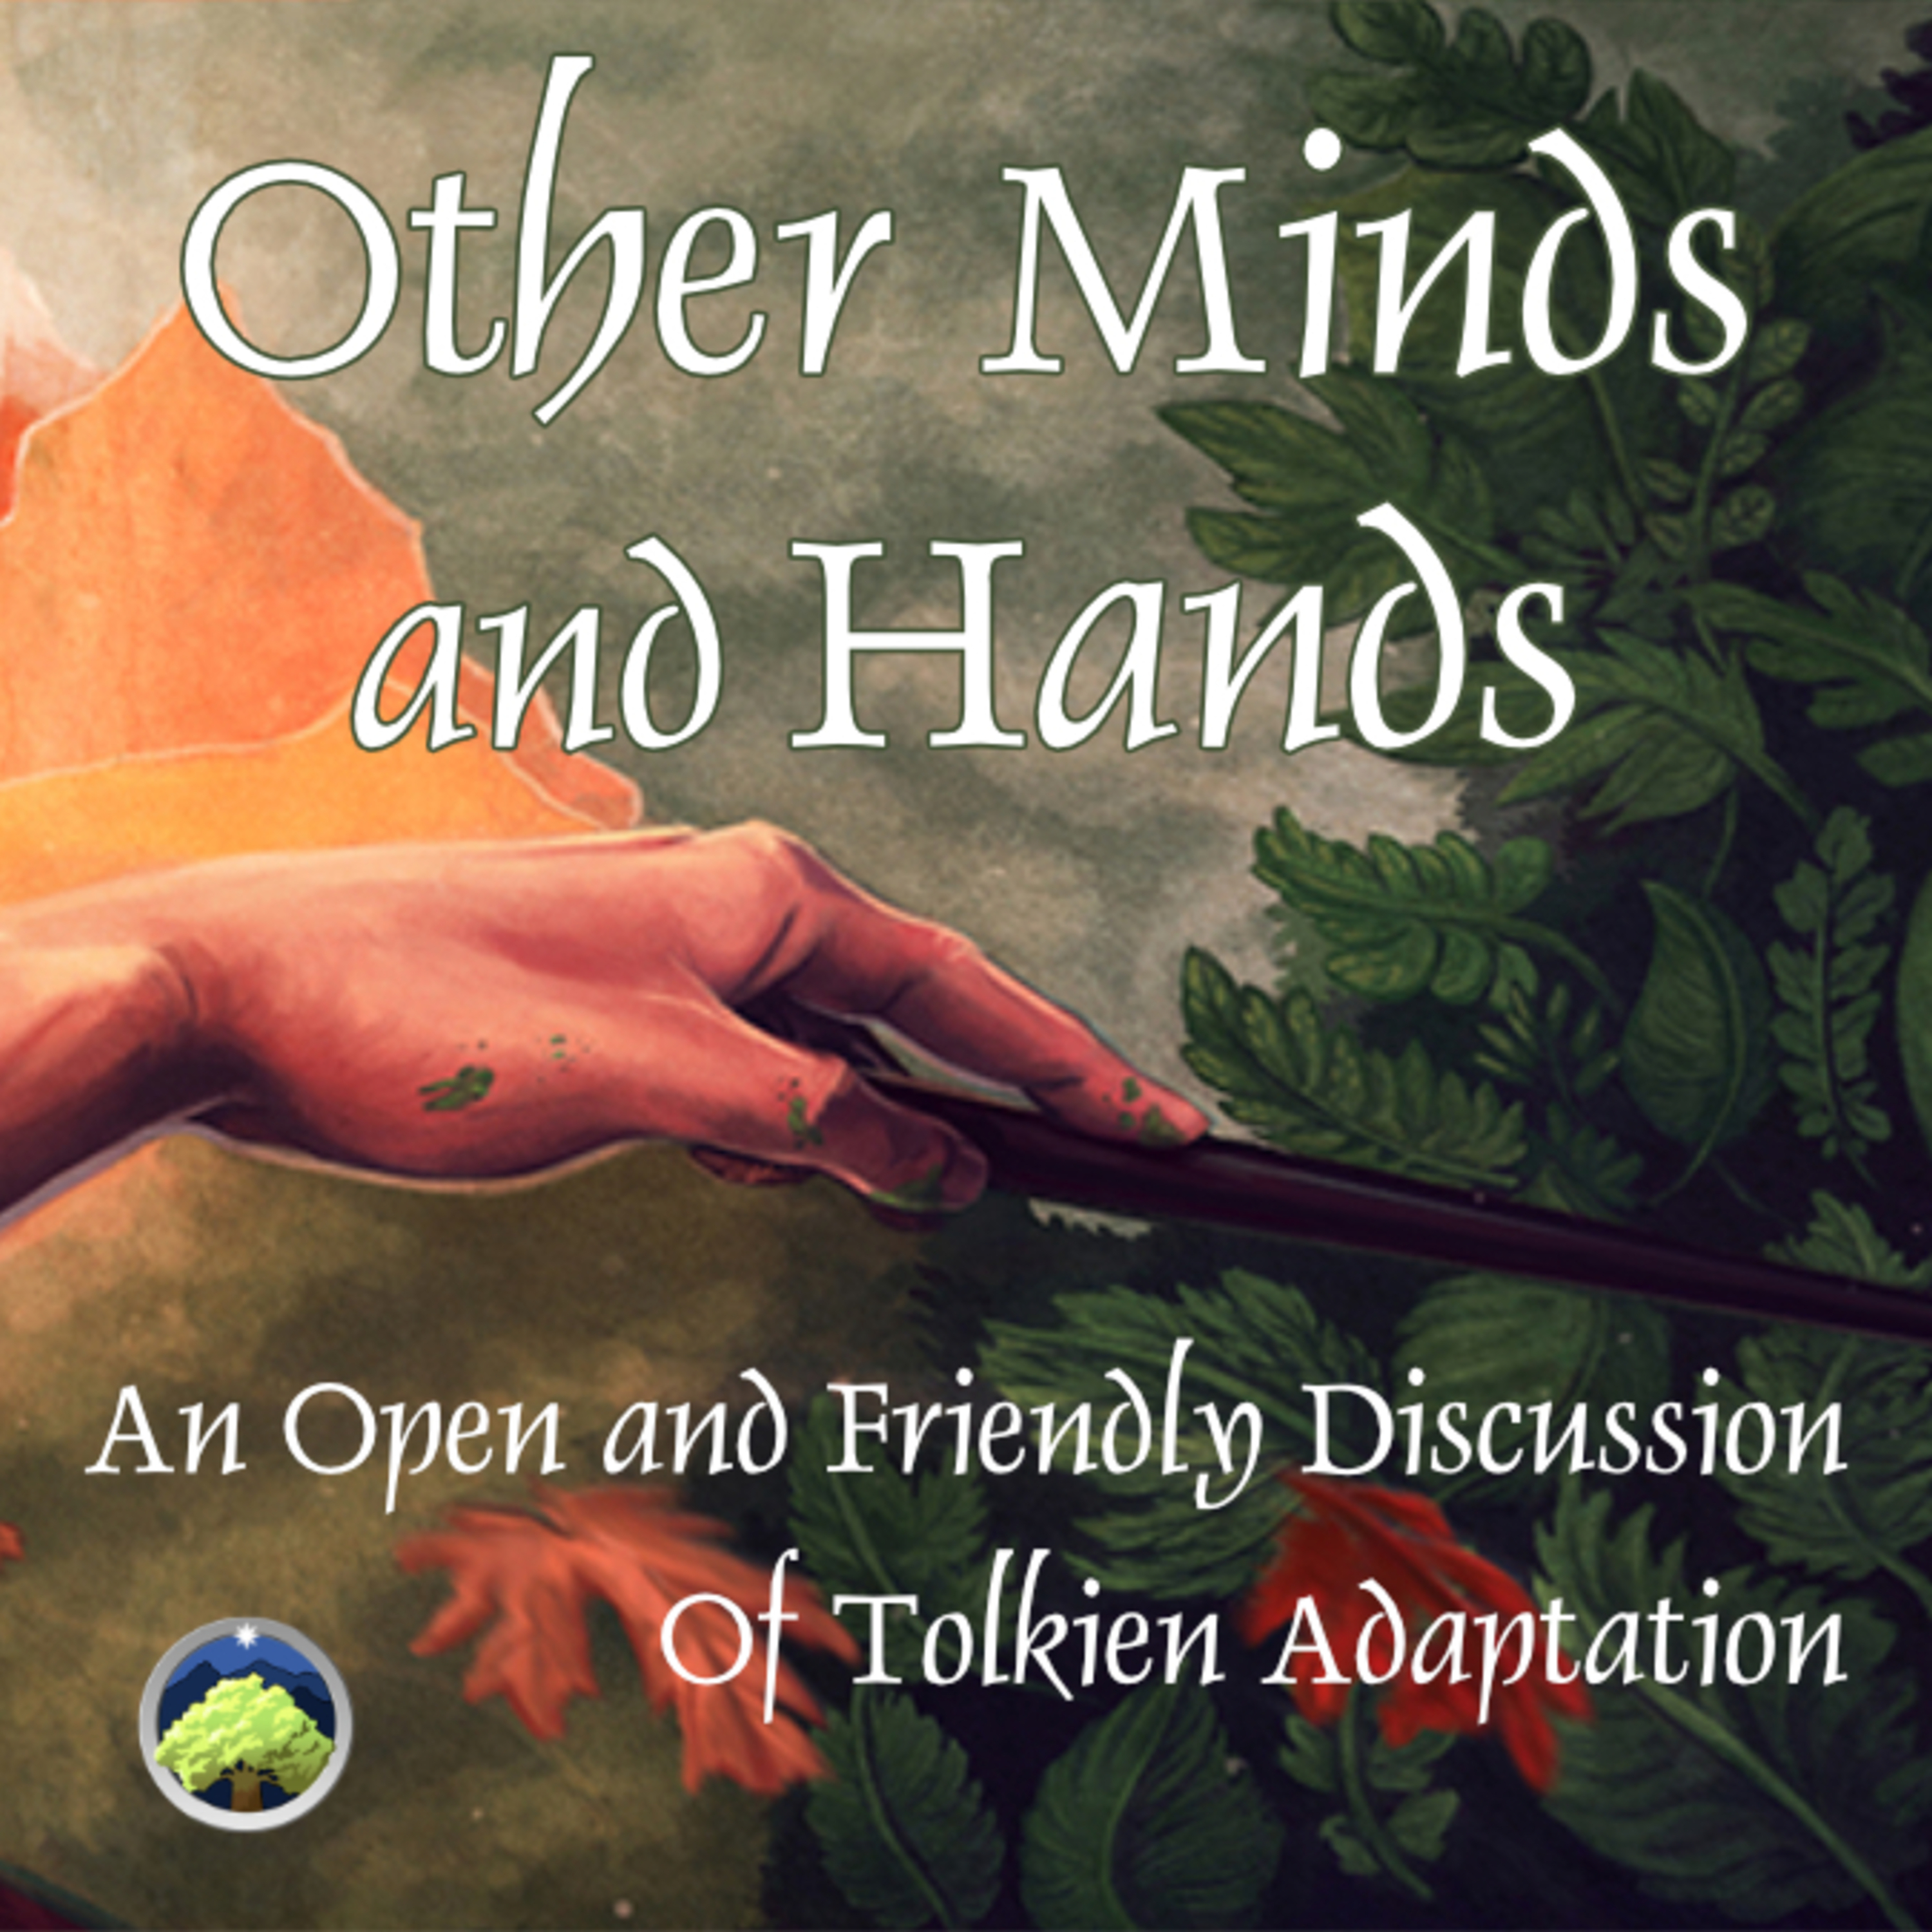 541: Other Minds and Hands, Episode 51